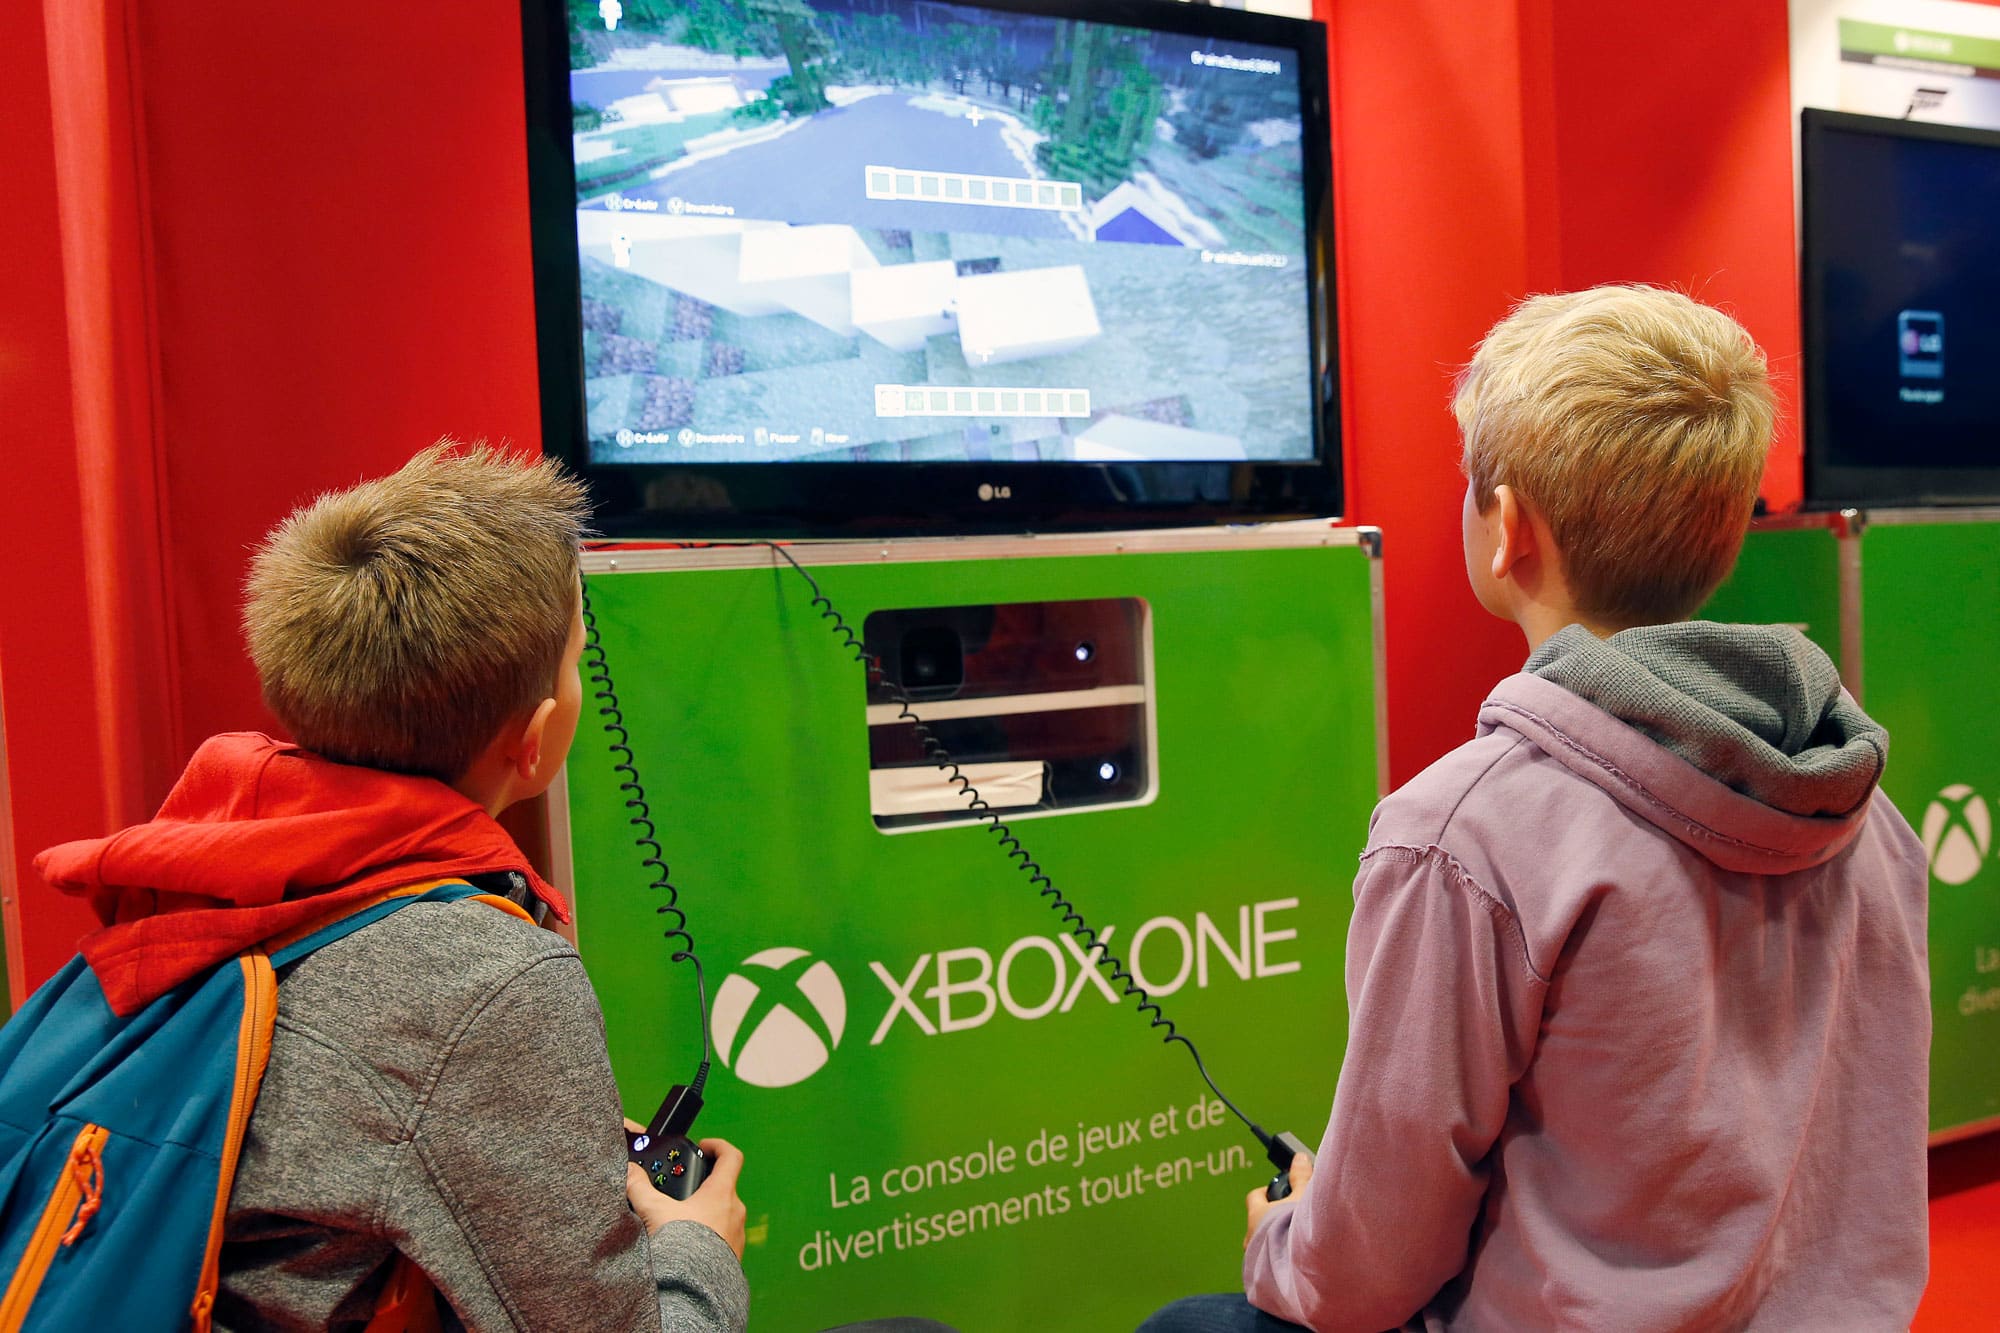 Microsoft to pay $20 million fine to FTC for improper storage of information on children's Xbox accounts